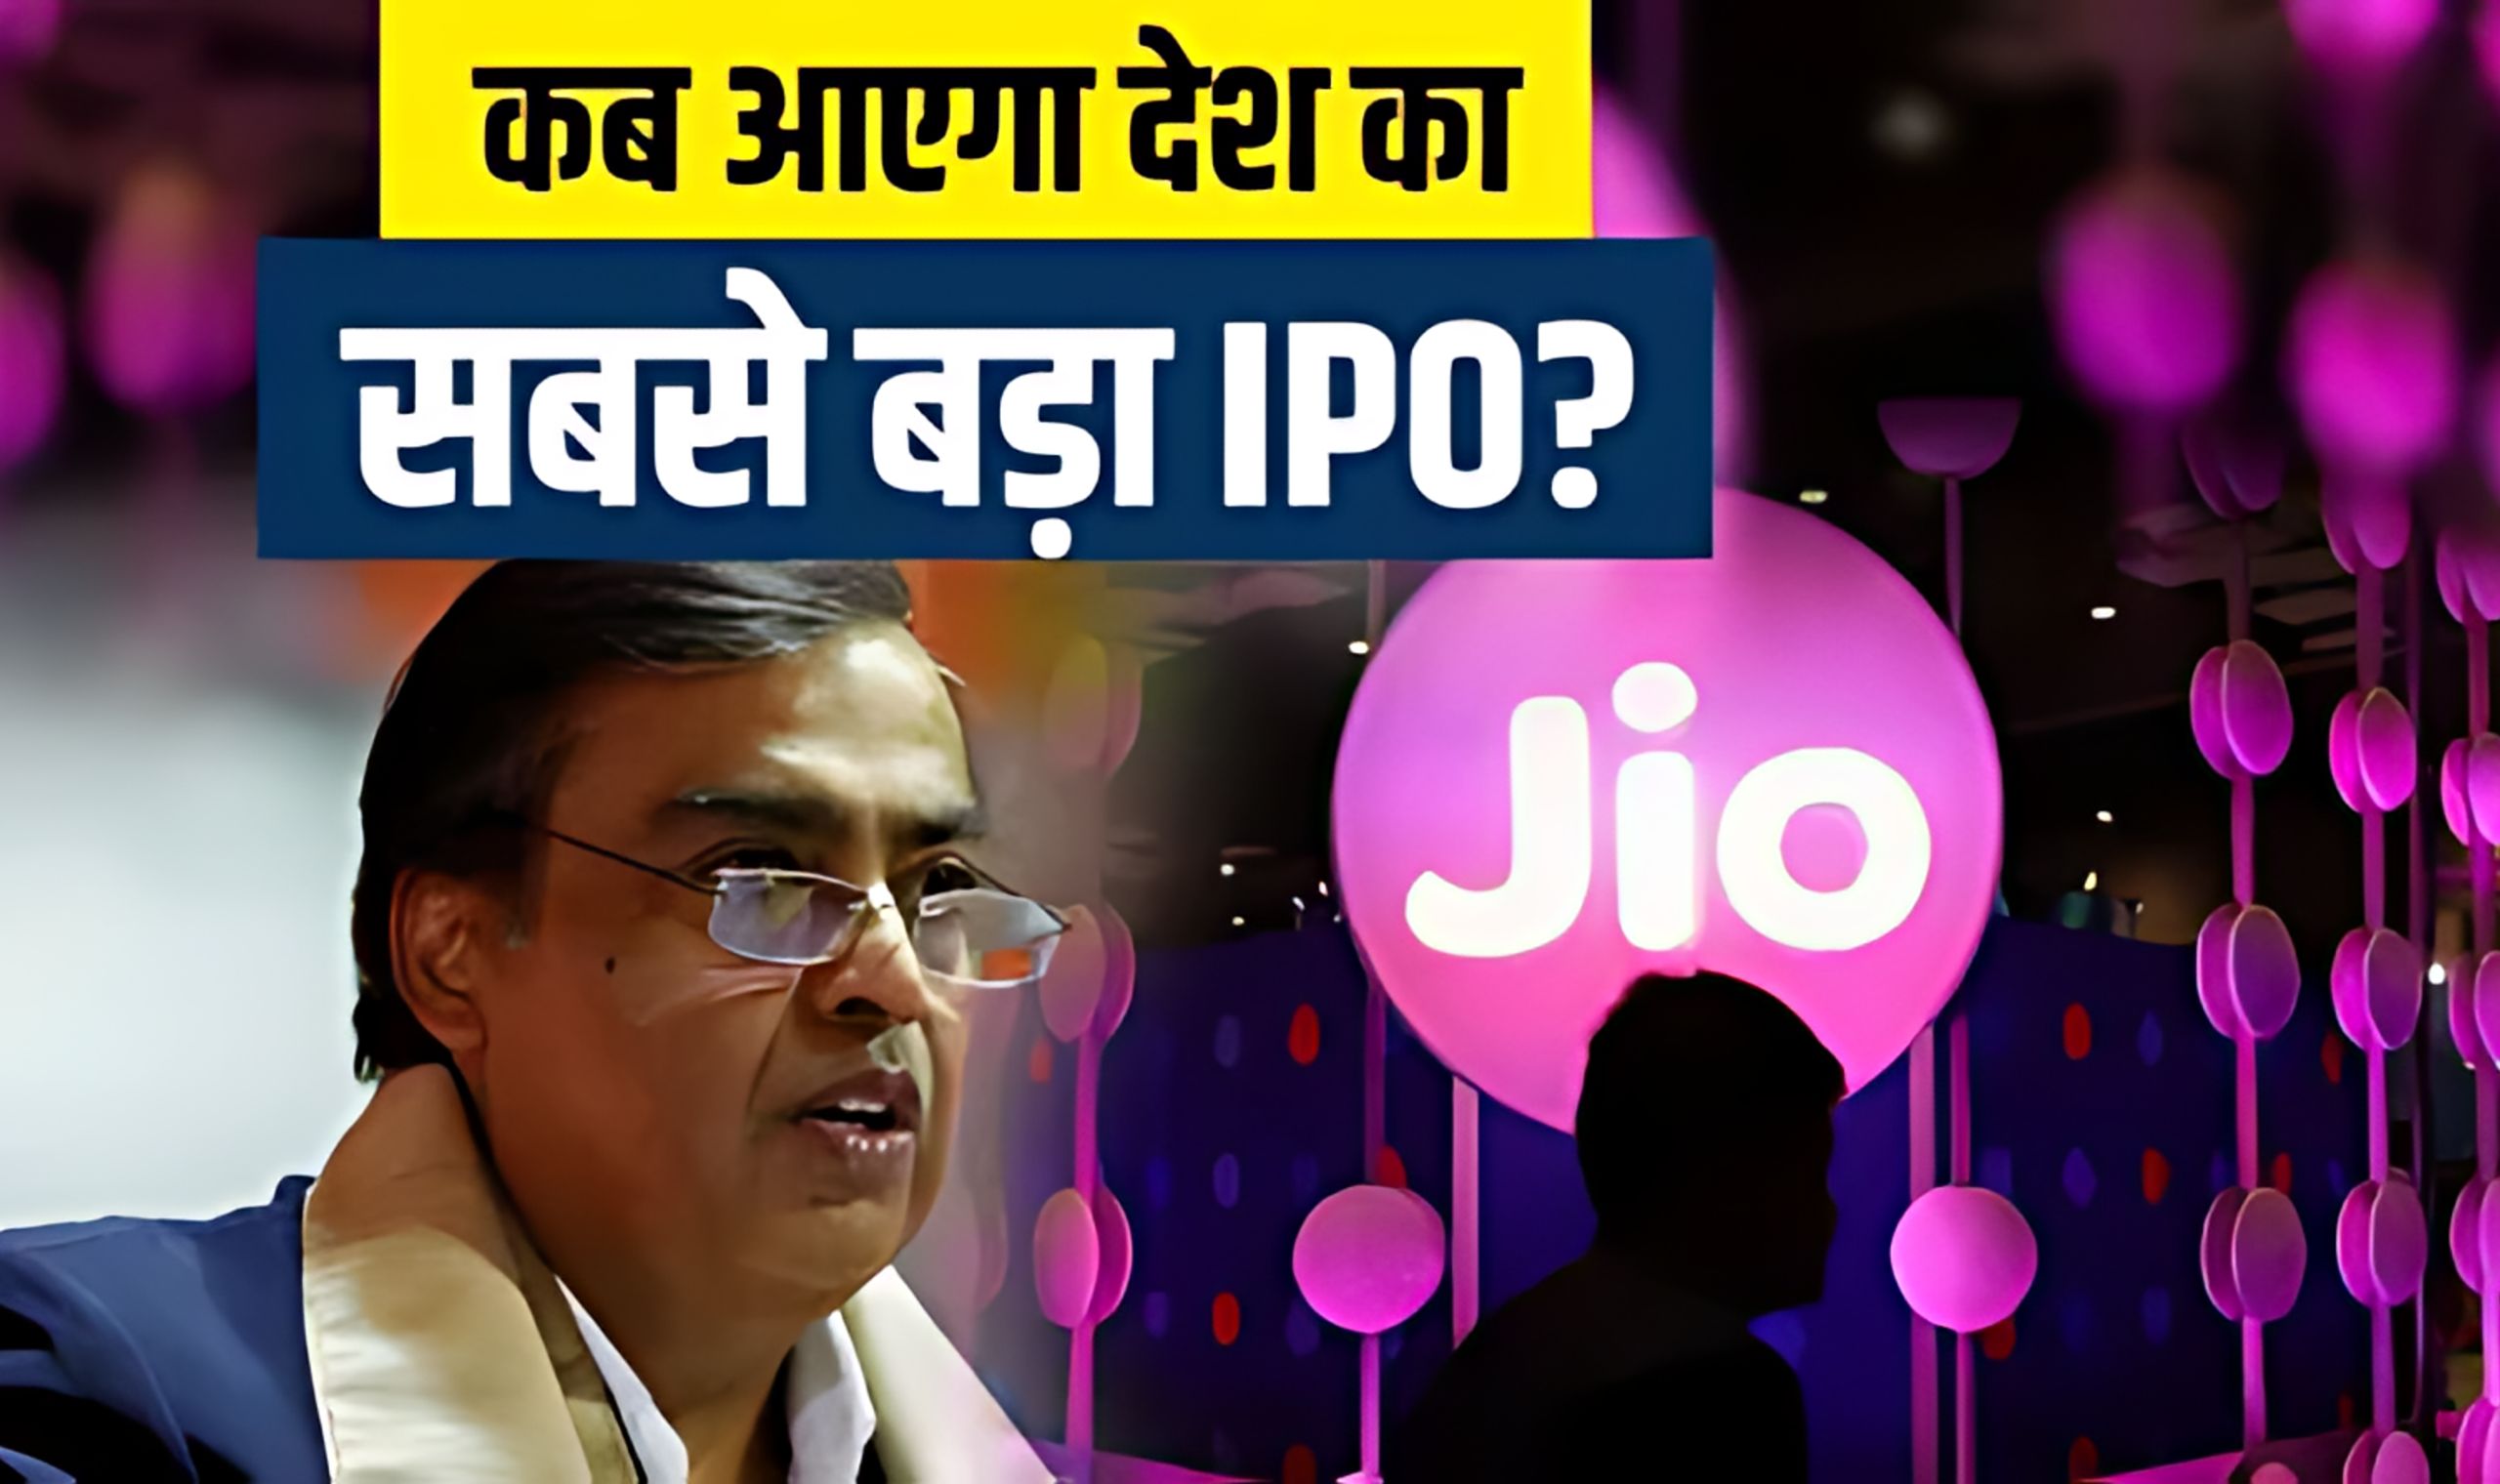 Reliance JIO IPO: An In-depth Analysis and Future Prospects